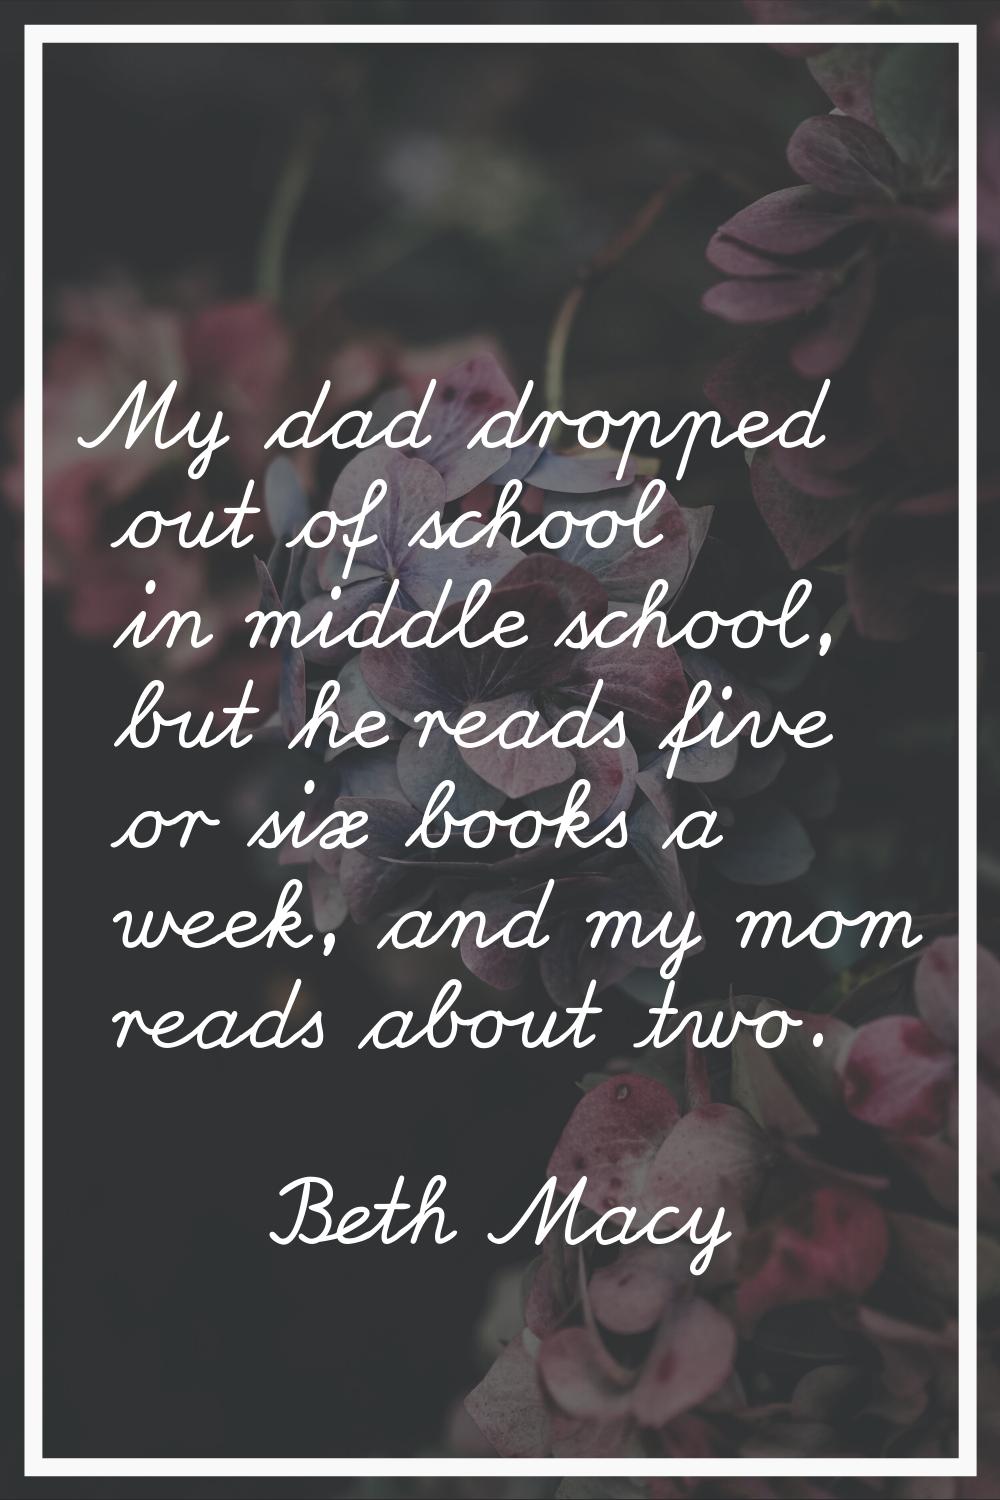 My dad dropped out of school in middle school, but he reads five or six books a week, and my mom re